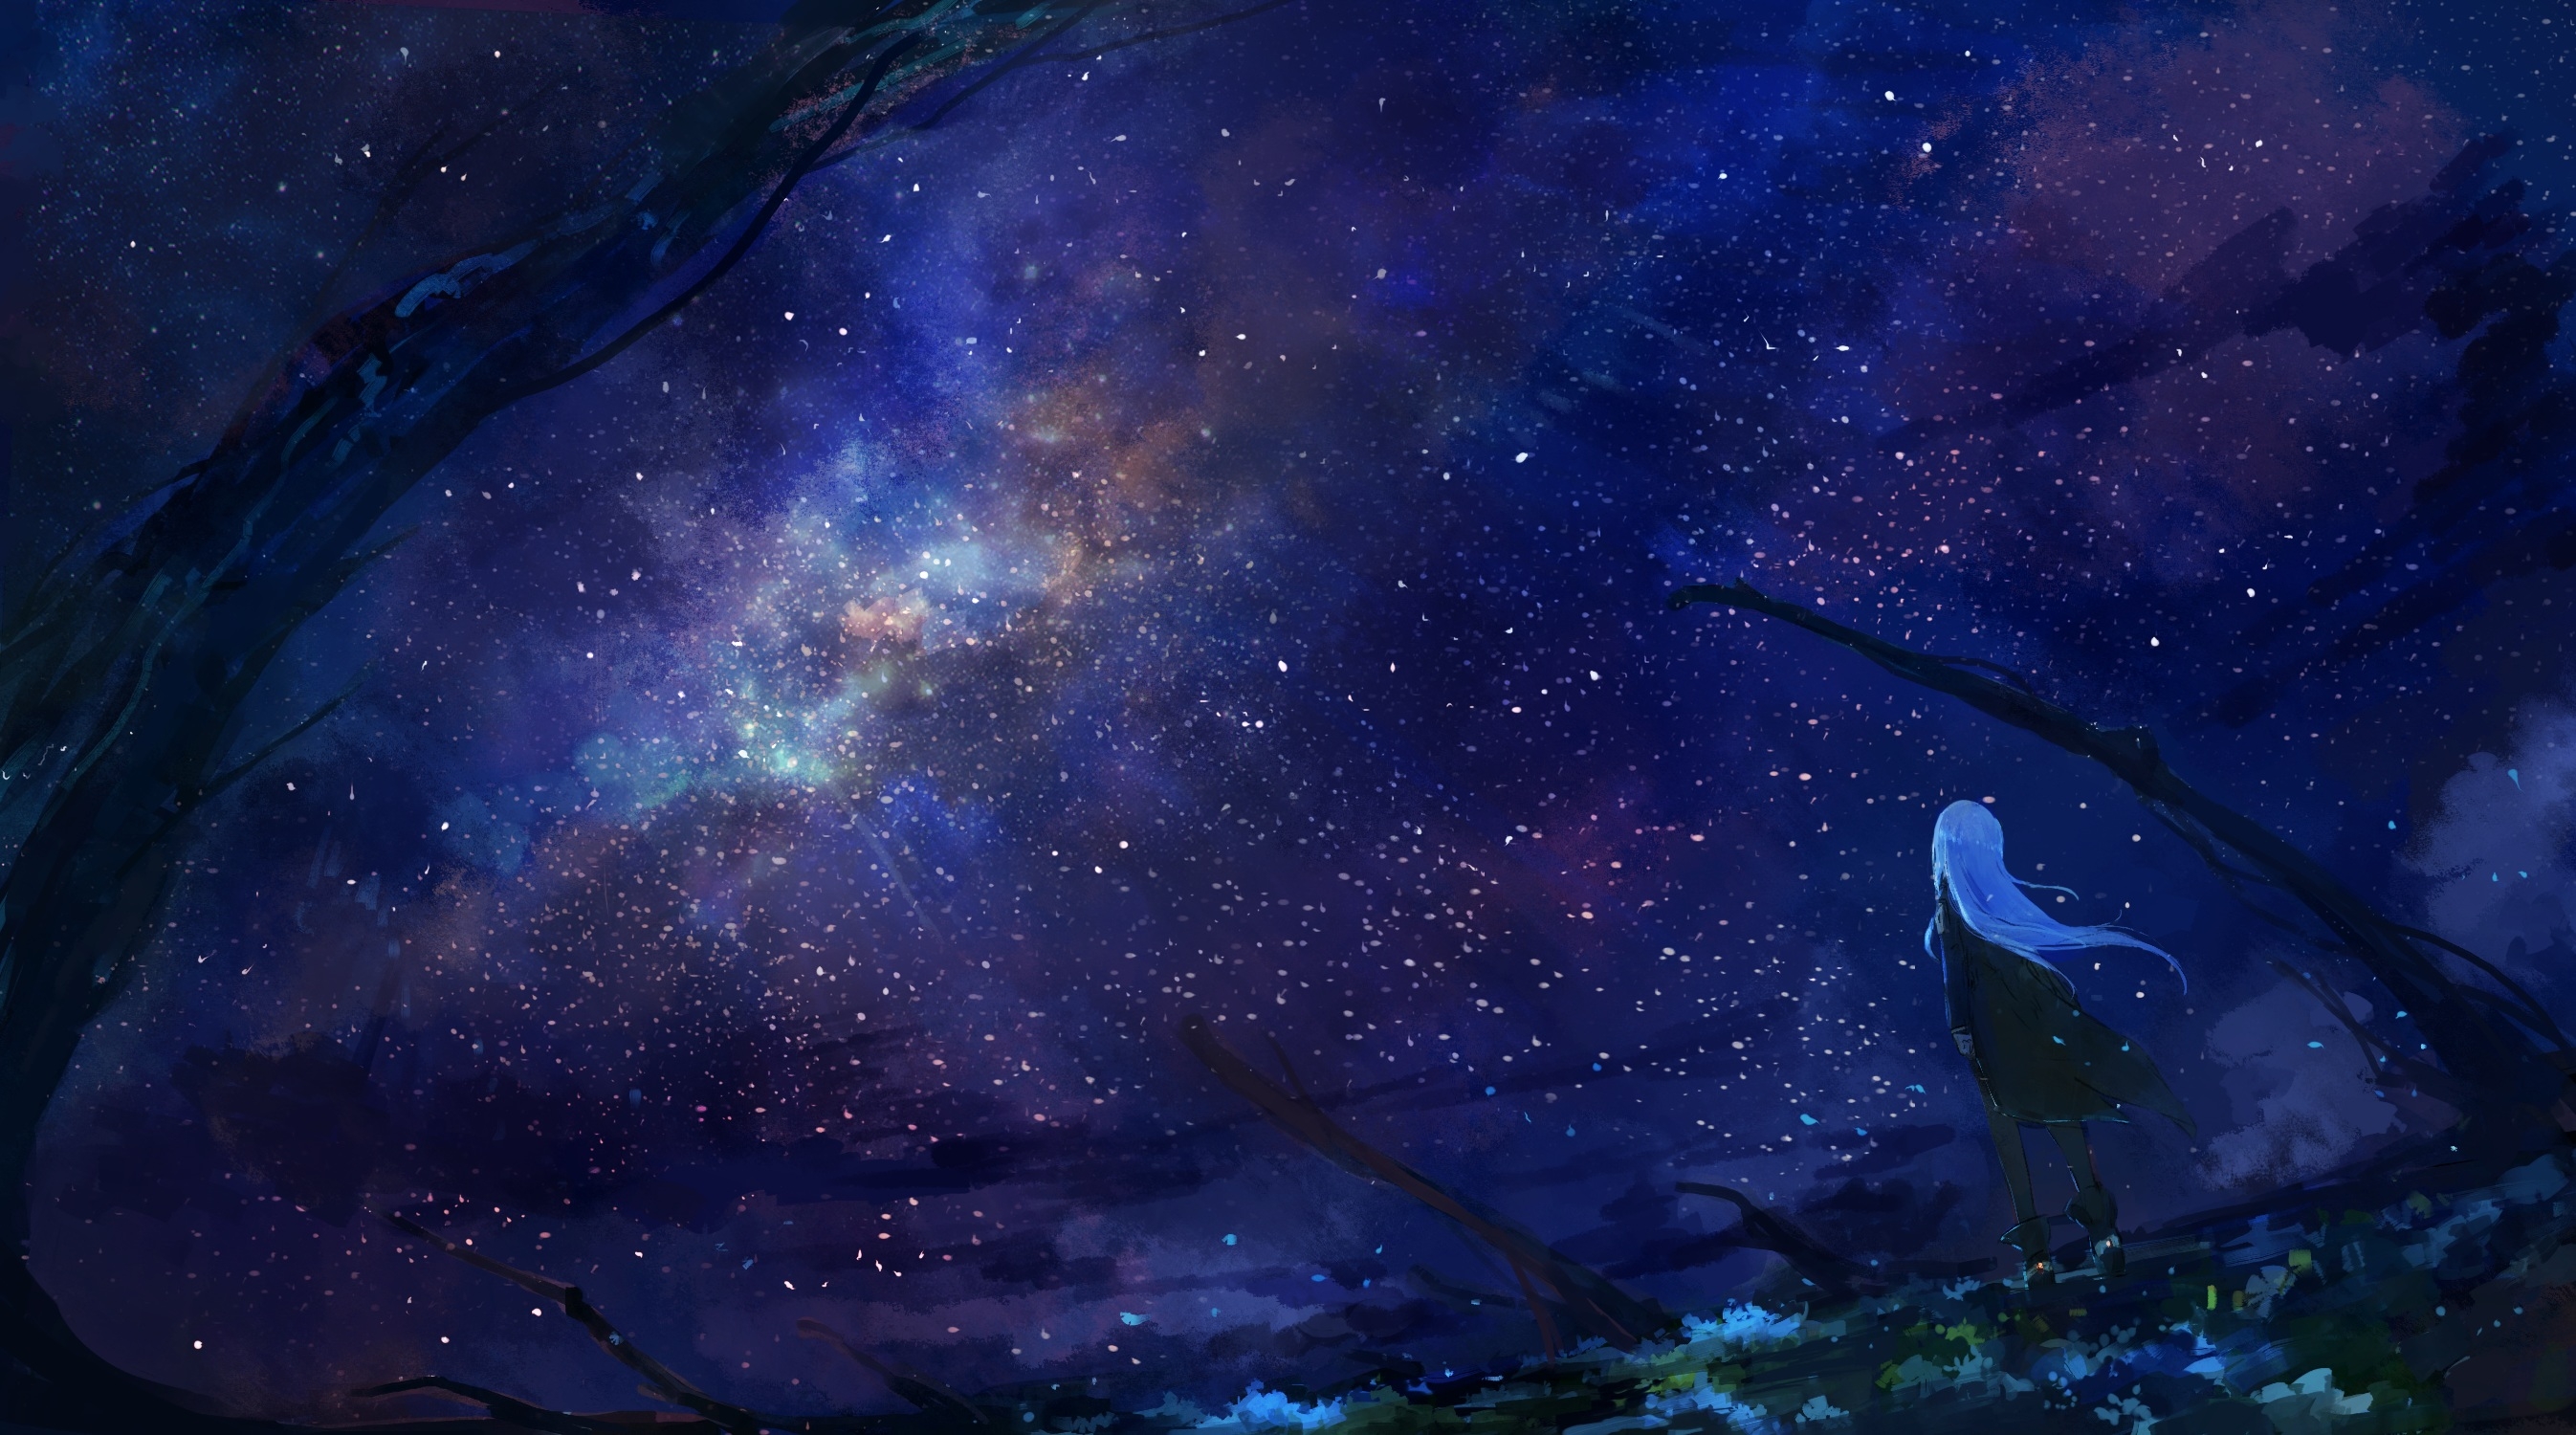 Download 2693x1500 Anime Starry Sky, Anime Girl, Back View, Night, Scenic, Boots Wallpaper